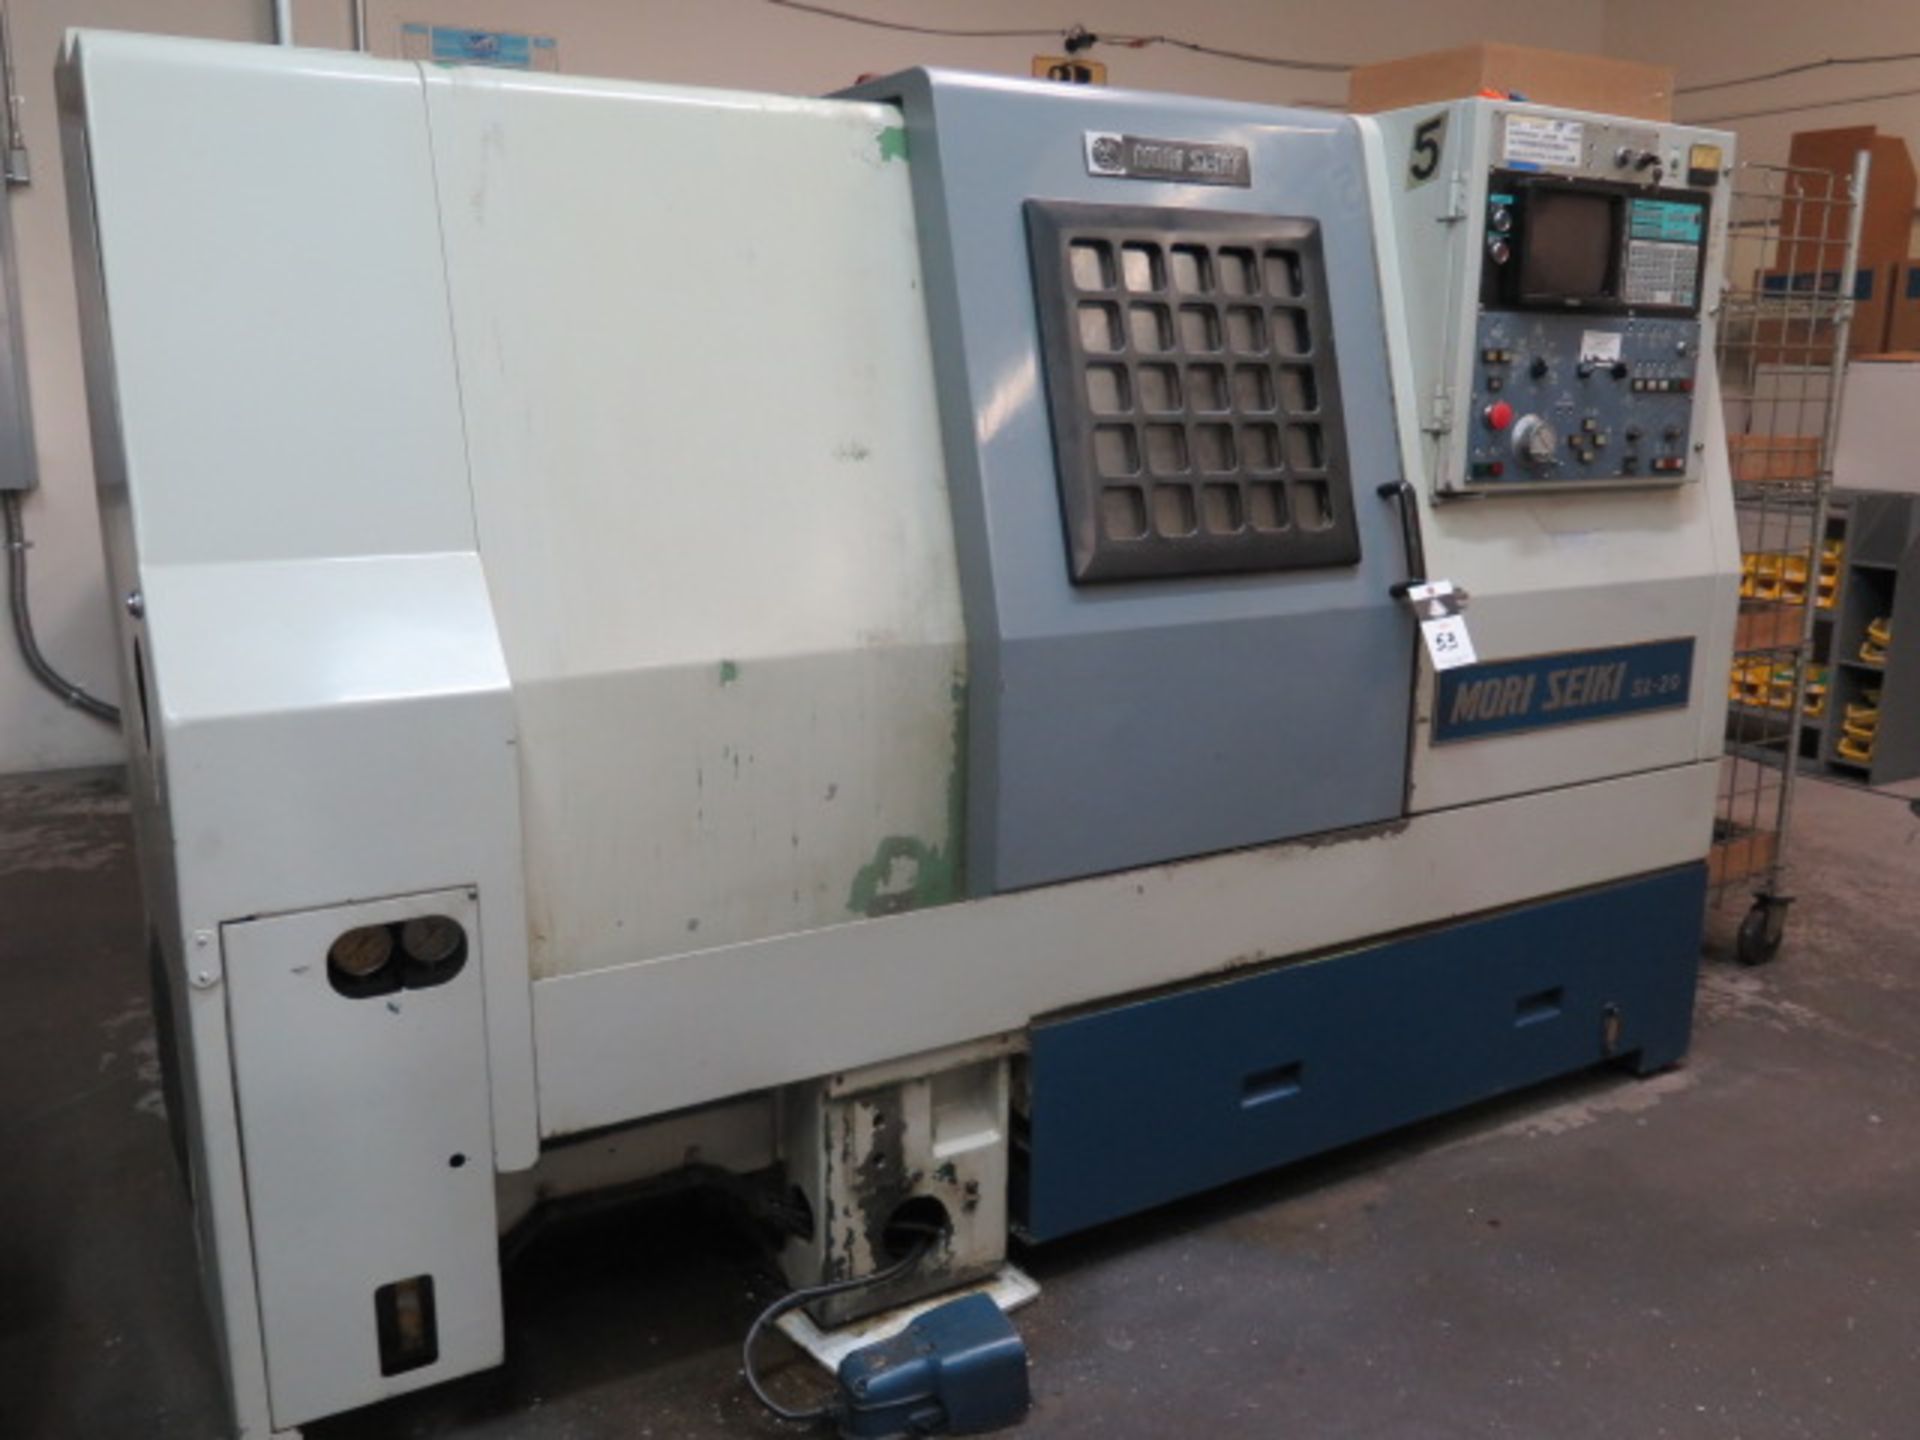 Mori Seiki SL-20 CNC Turning Center s/n 7 w/ Yasnac Controls, 10-Station Turret, SOLD AS IS - Image 2 of 12